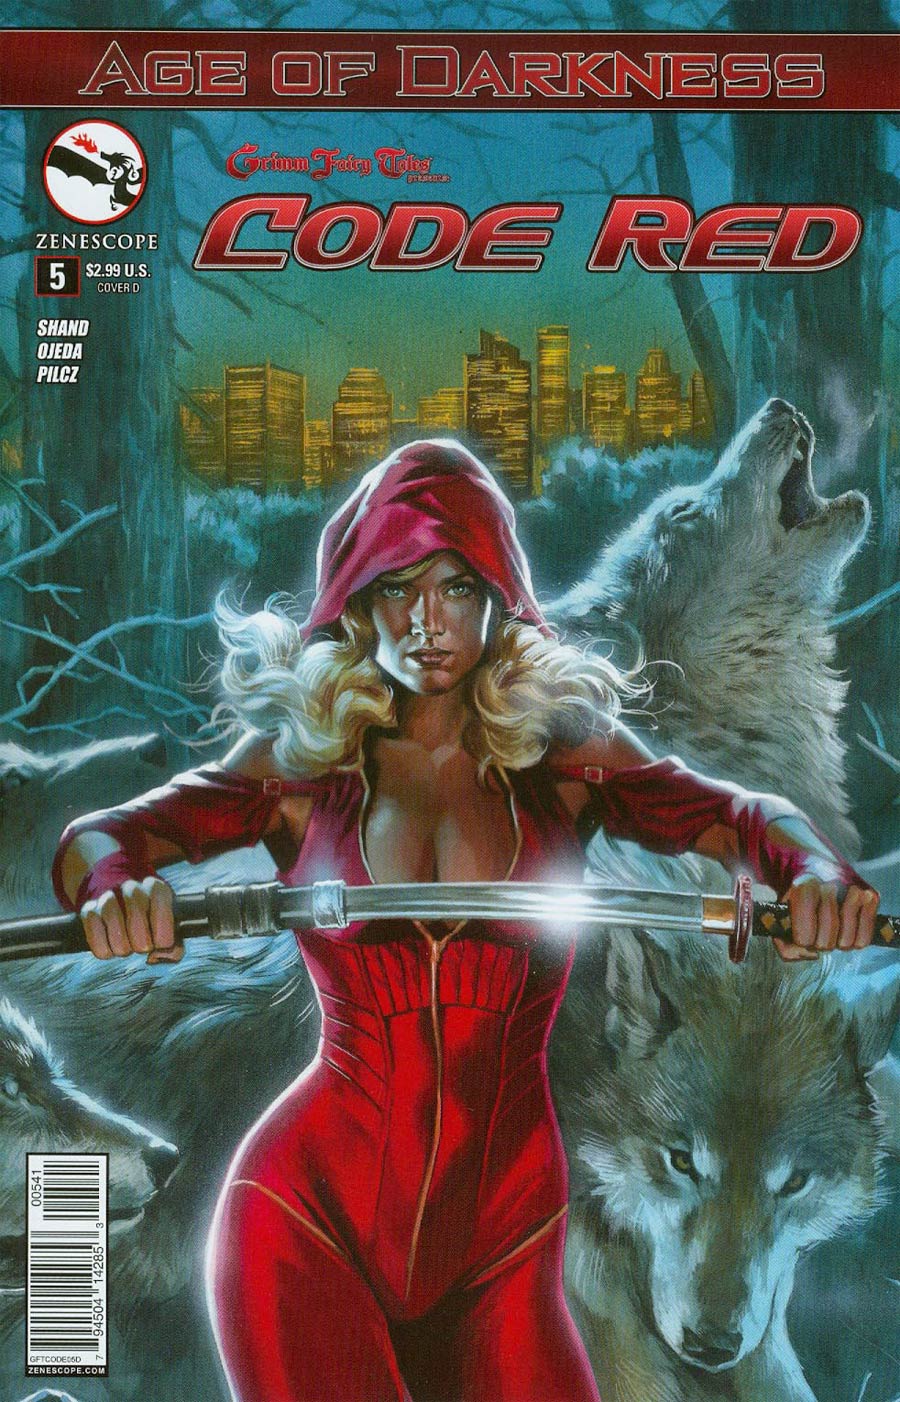 Grimm Fairy Tales Presents Code Red #5 Cover D Felipe Massafera (Age Of Darkness Tie-In)